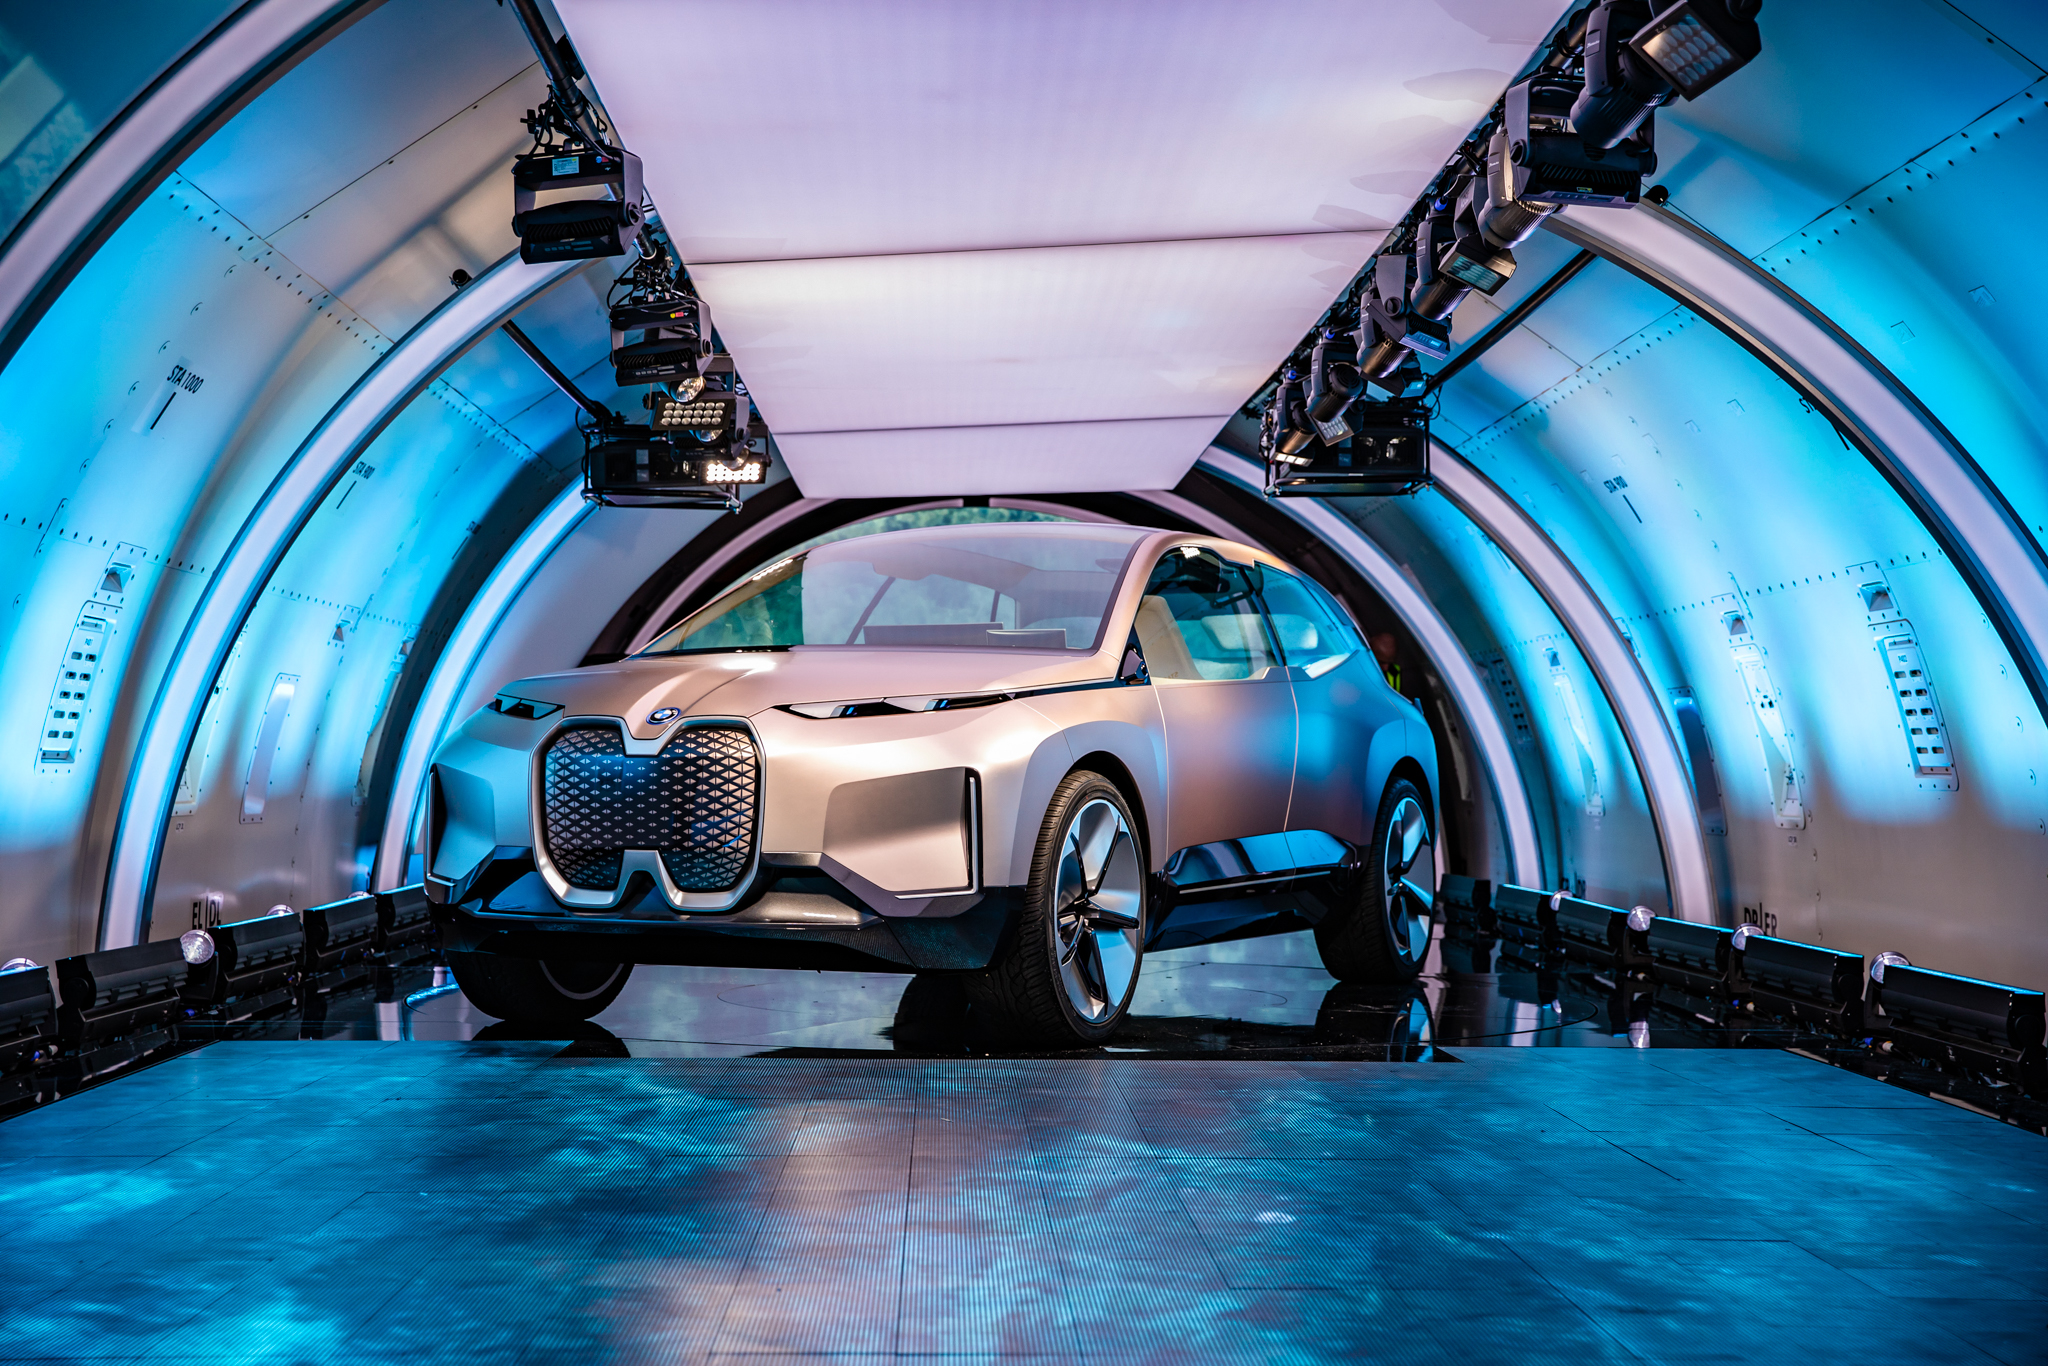 BMW's i3 and i8 concepts - two practical, exciting electric cars